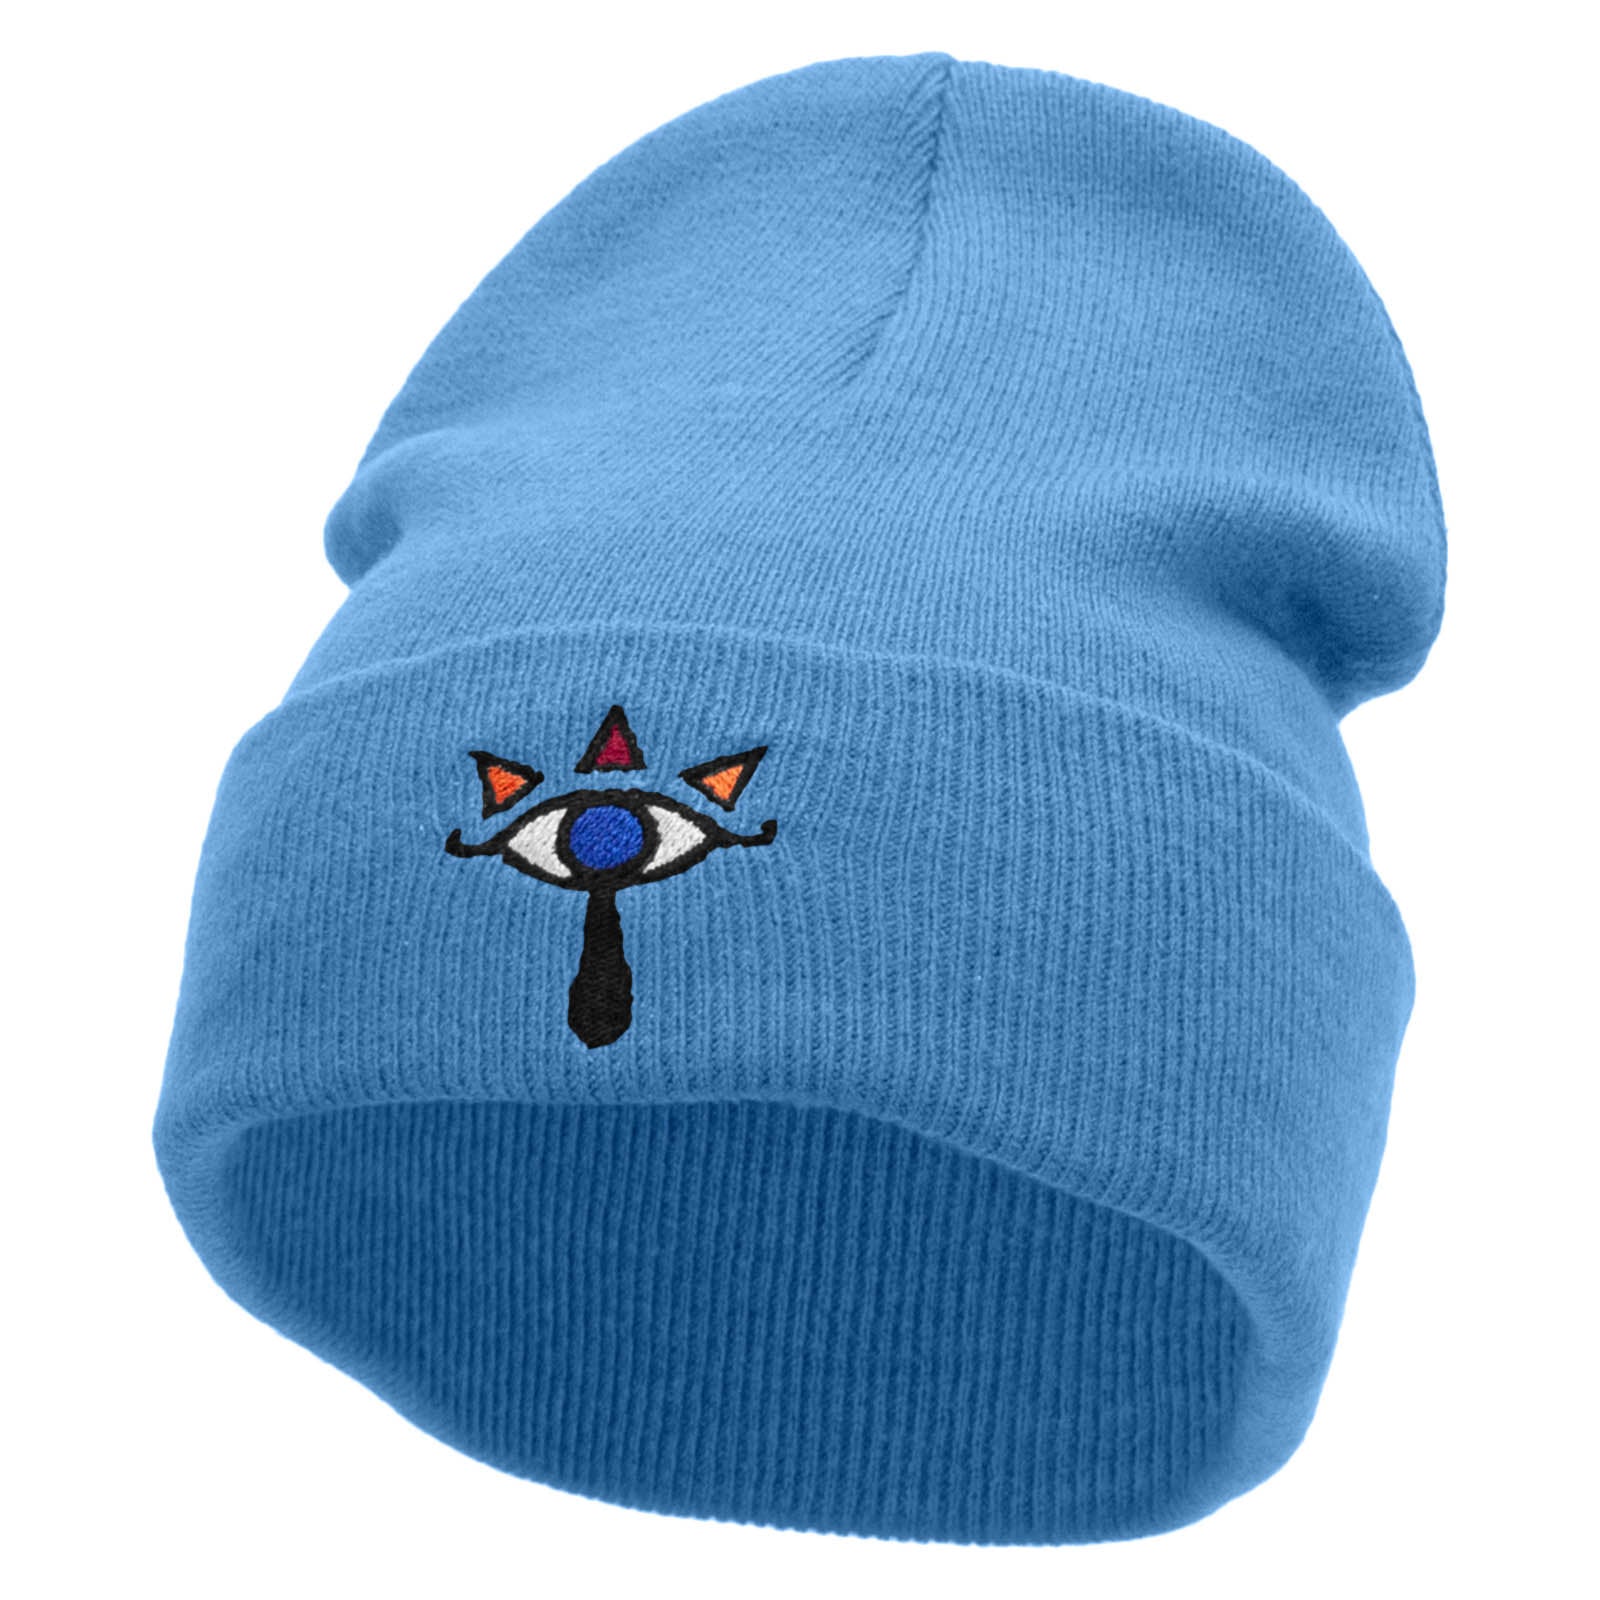 Eye Crest Embroidered 12 Inch Long Knitted Beanie - Sky Blue OSFM